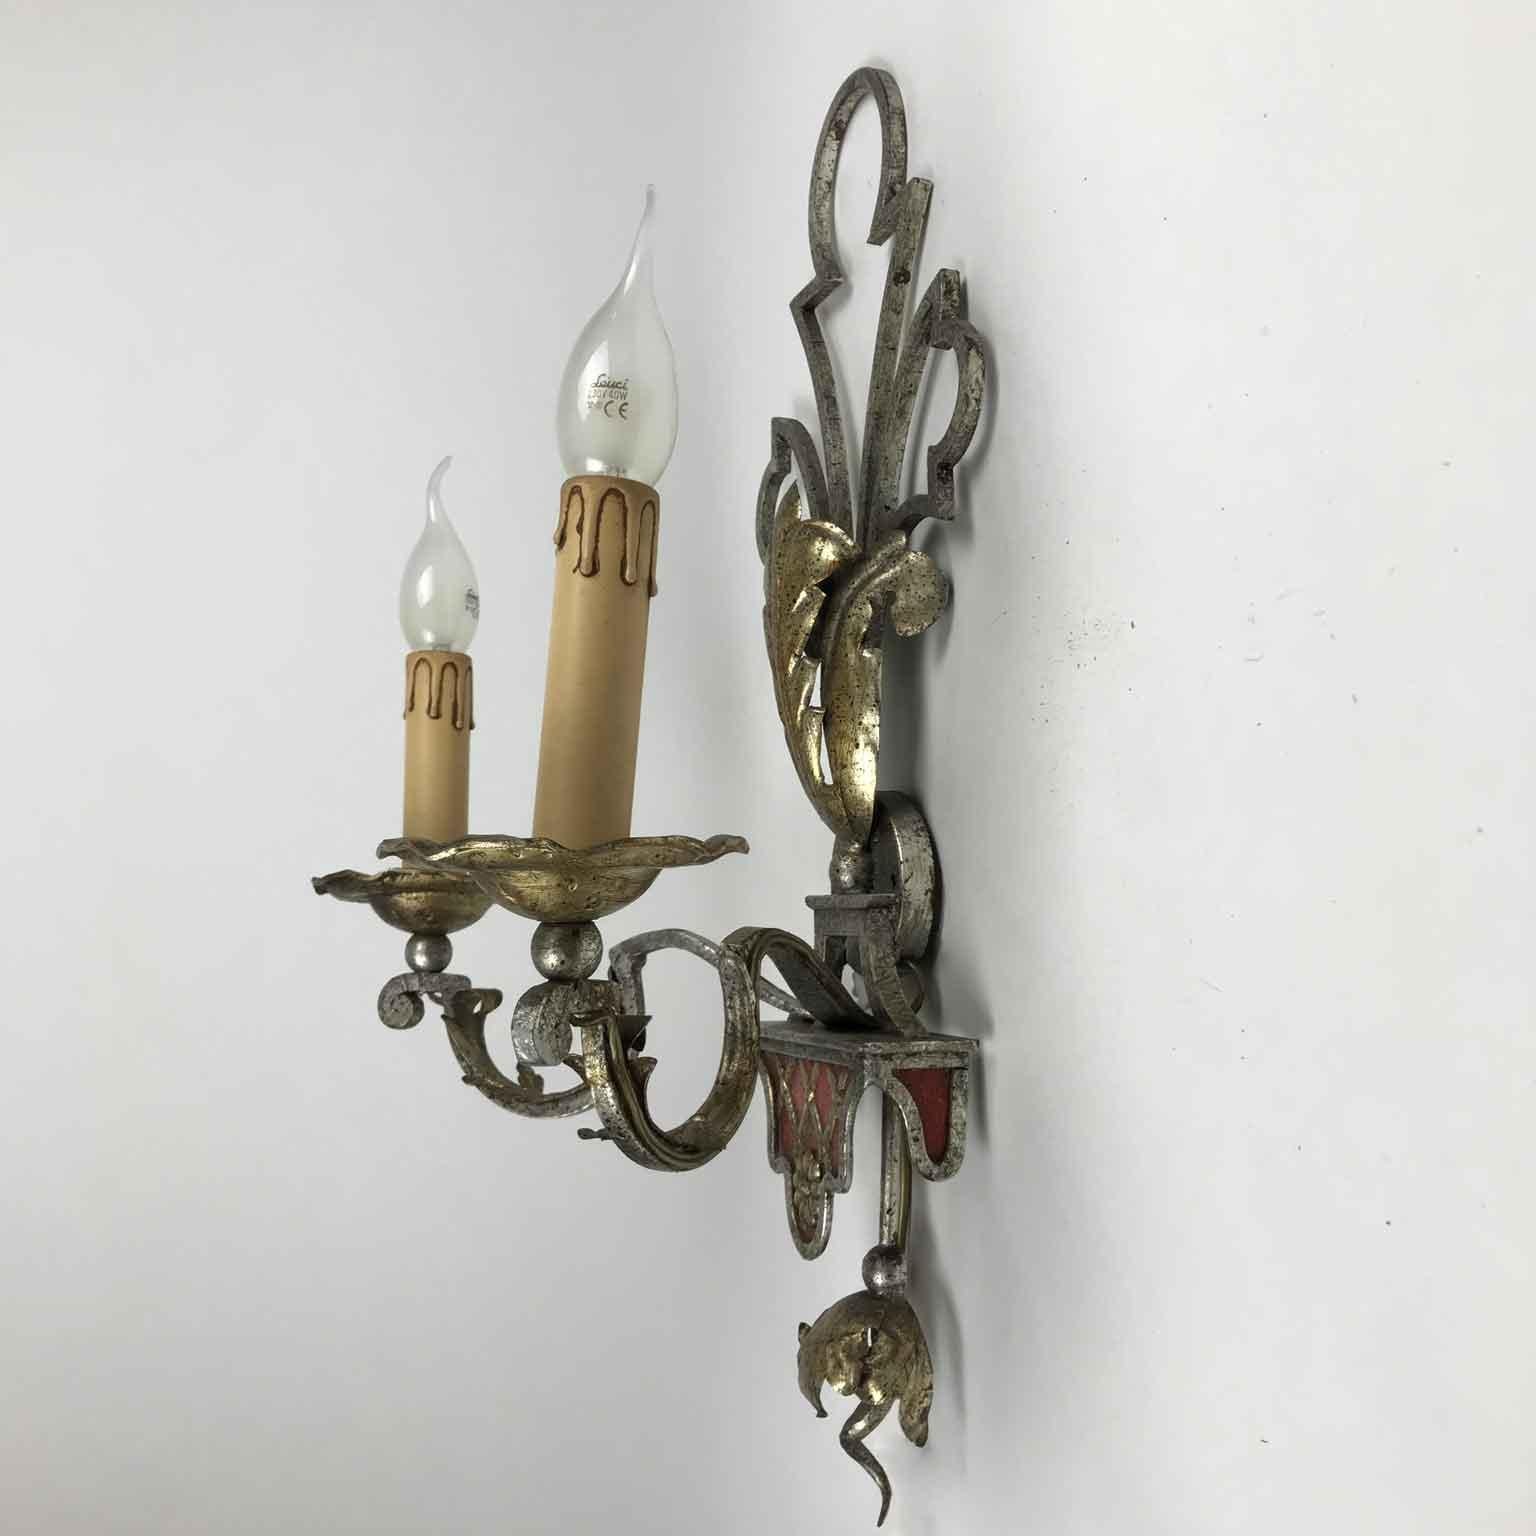 Italian Florentine Pair of Iron Sconces by Banci Firenze 1980 Renaissance Style For Sale 1